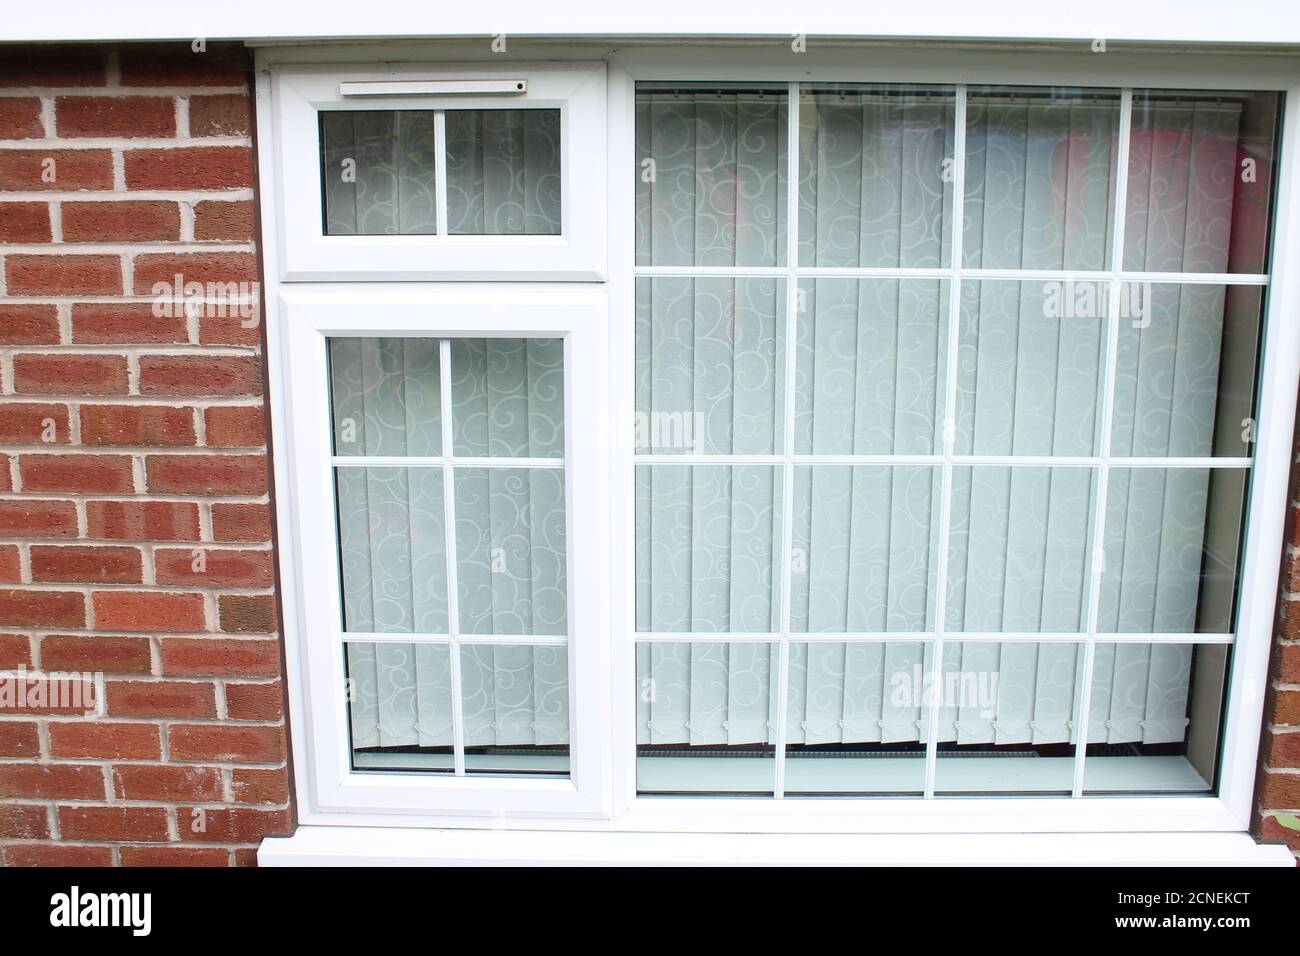 Georgian style UPVC double glazed window with built in ventilation above the small window UK Stock Photo